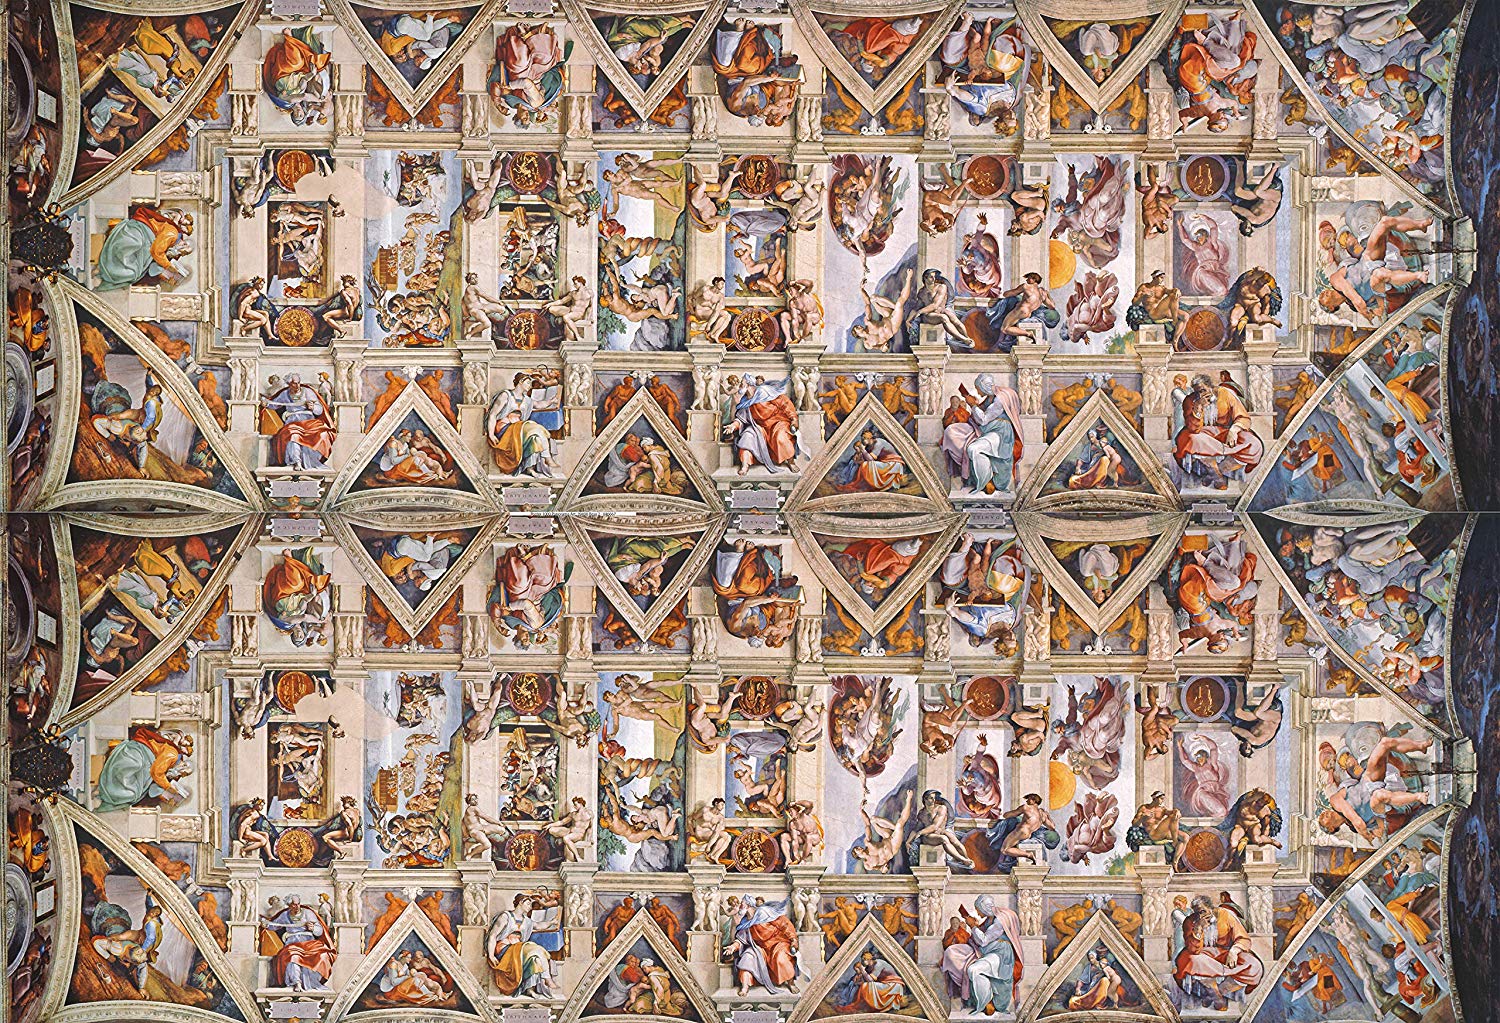 Sistine Chapel Ceiling Puzzle 1000 Piece Panoramic Fine Art Jigsaw by Clementoni 